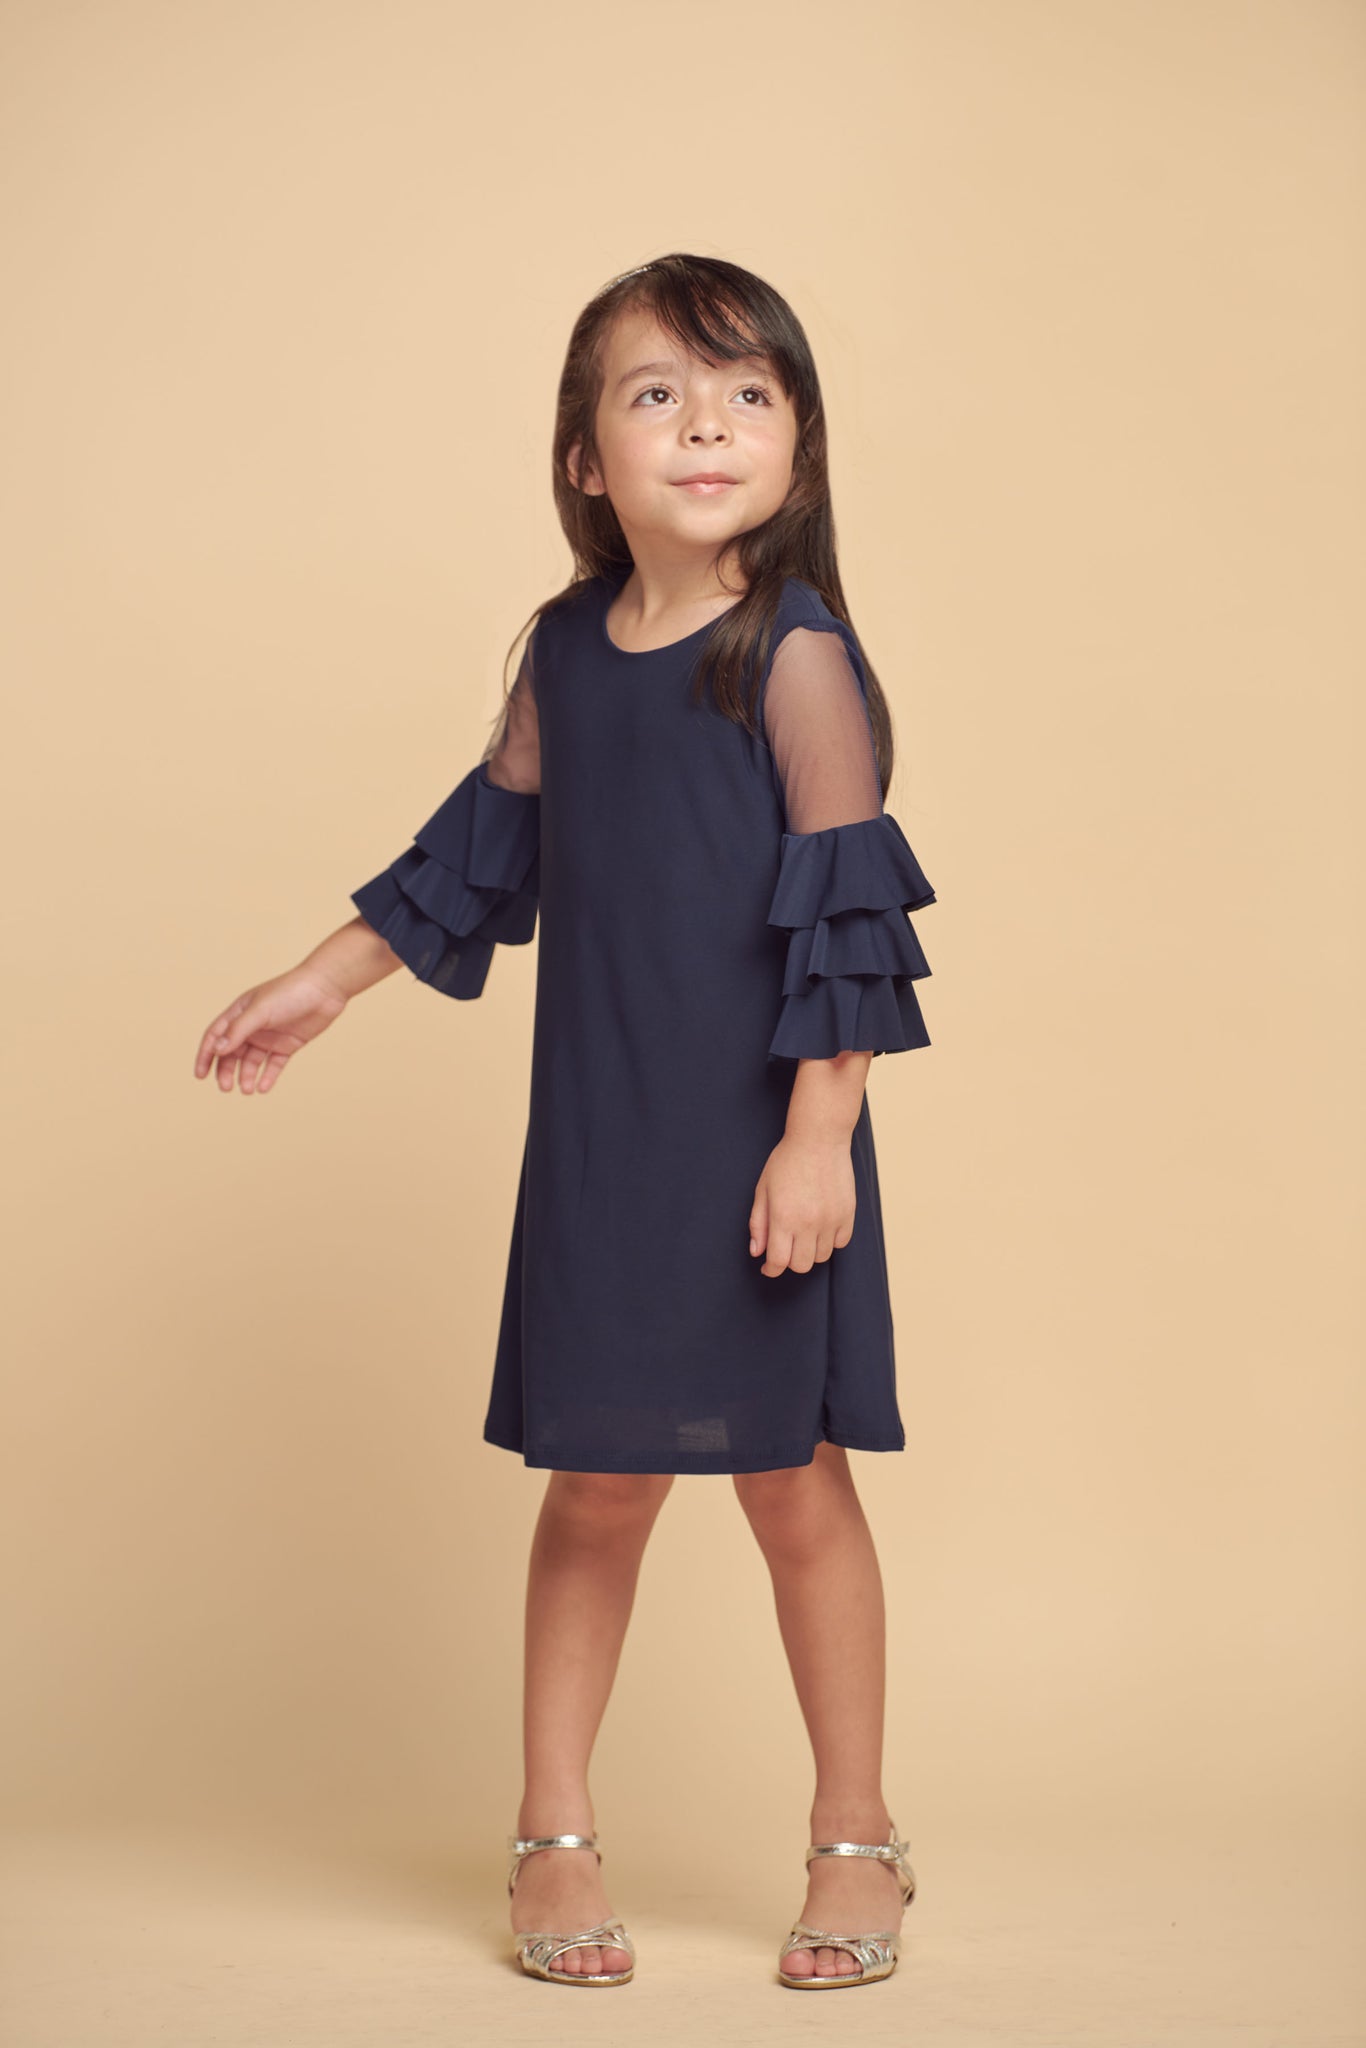 This is an all over stretch, navy tiered sleeve dress with mesh detailing on the sleeve. Hits above the knee for a beautiful and chic silhouette.